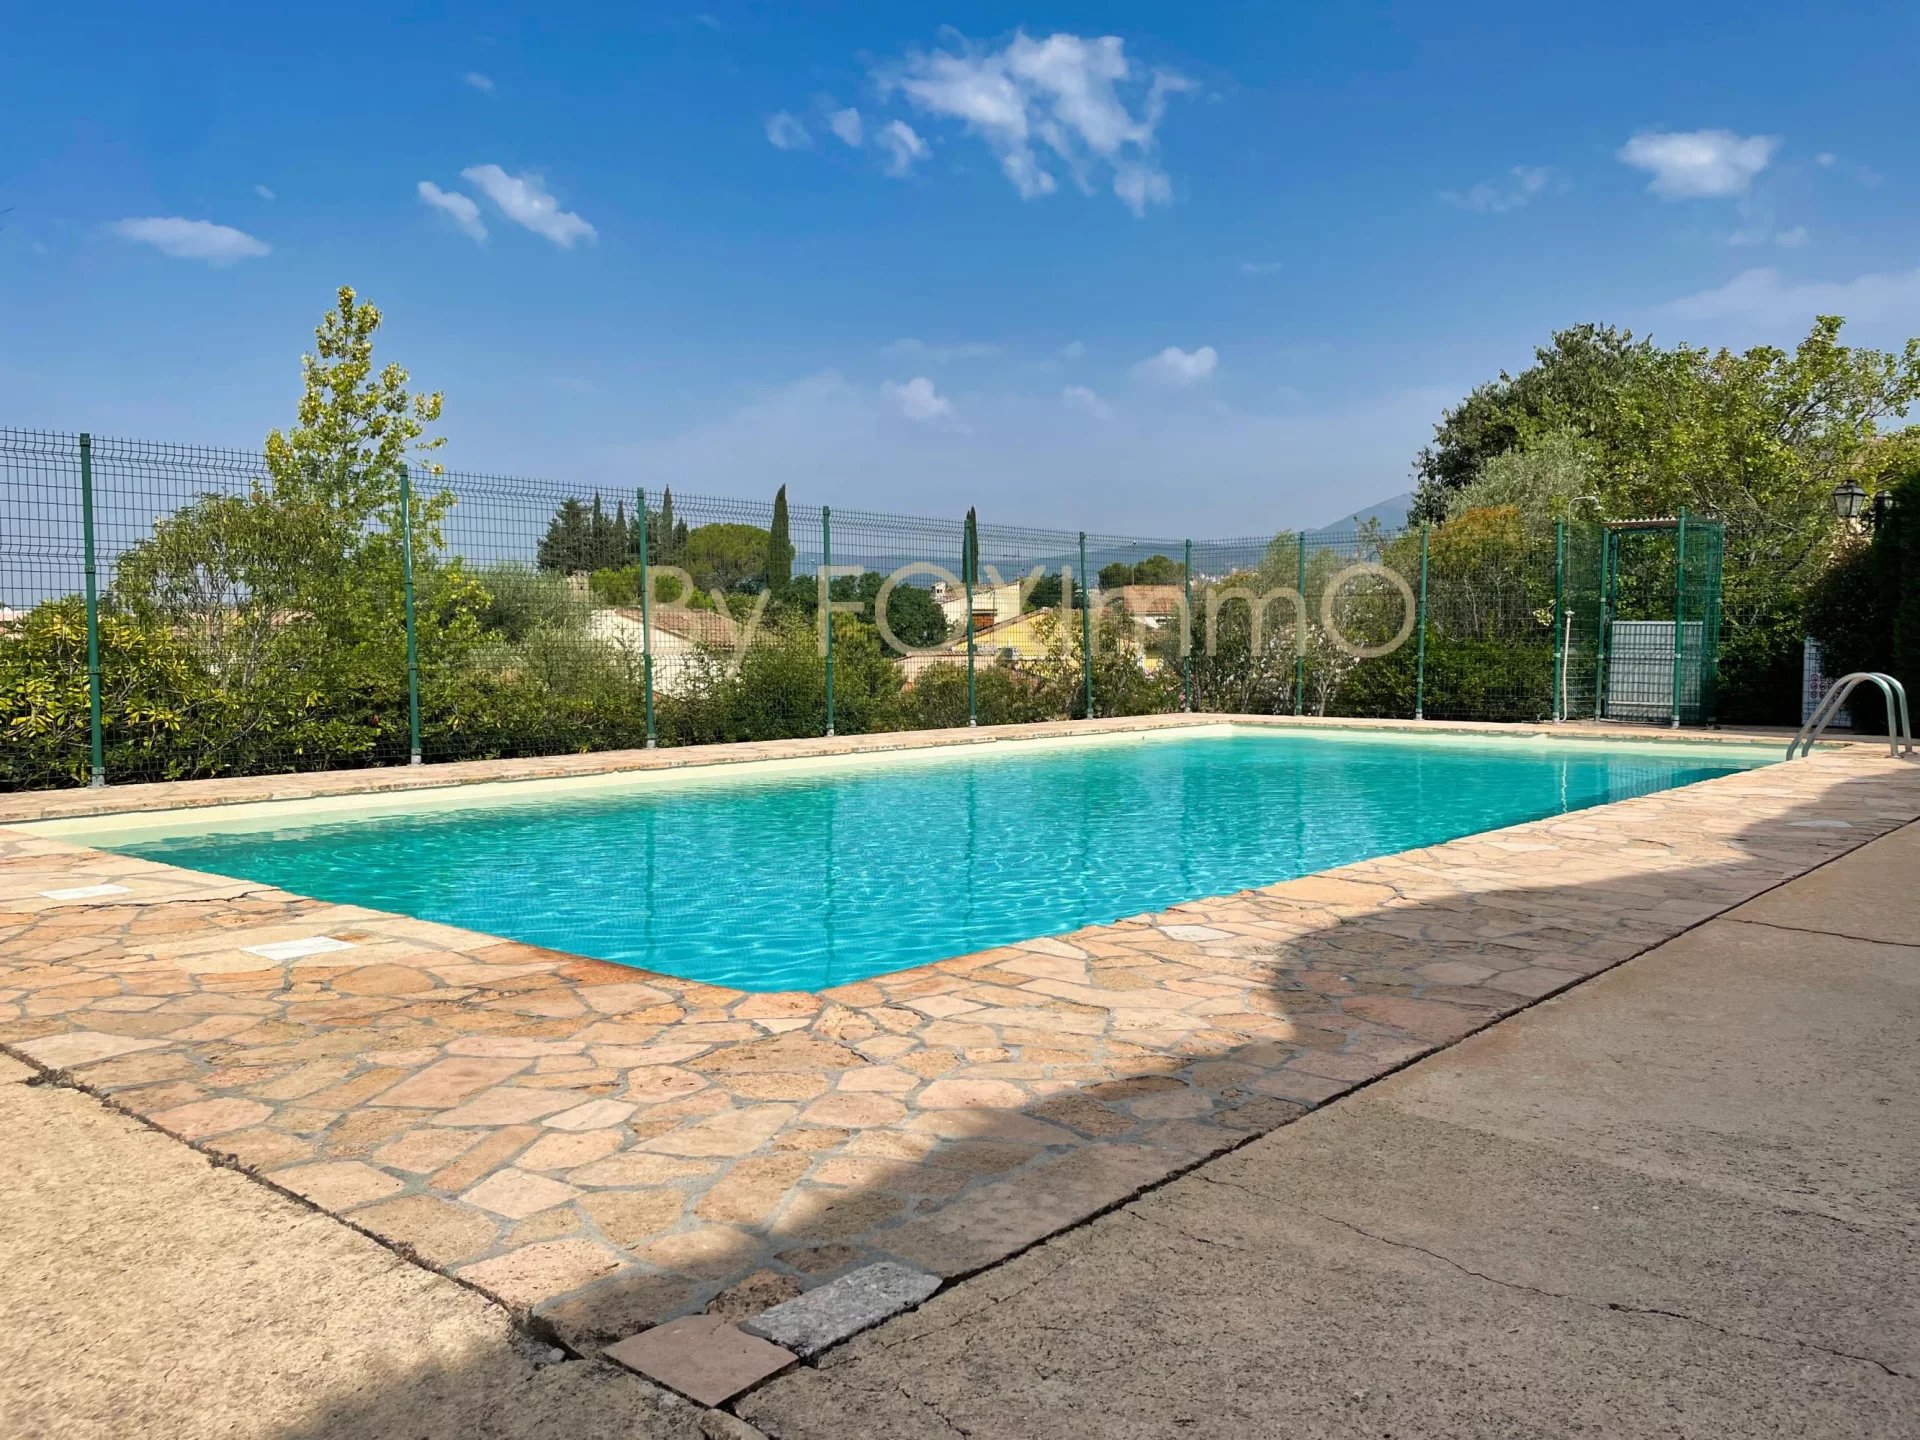 Semi-detached villa for sale on one side in absolute peace and quiet with communal swimming pool close to amenities